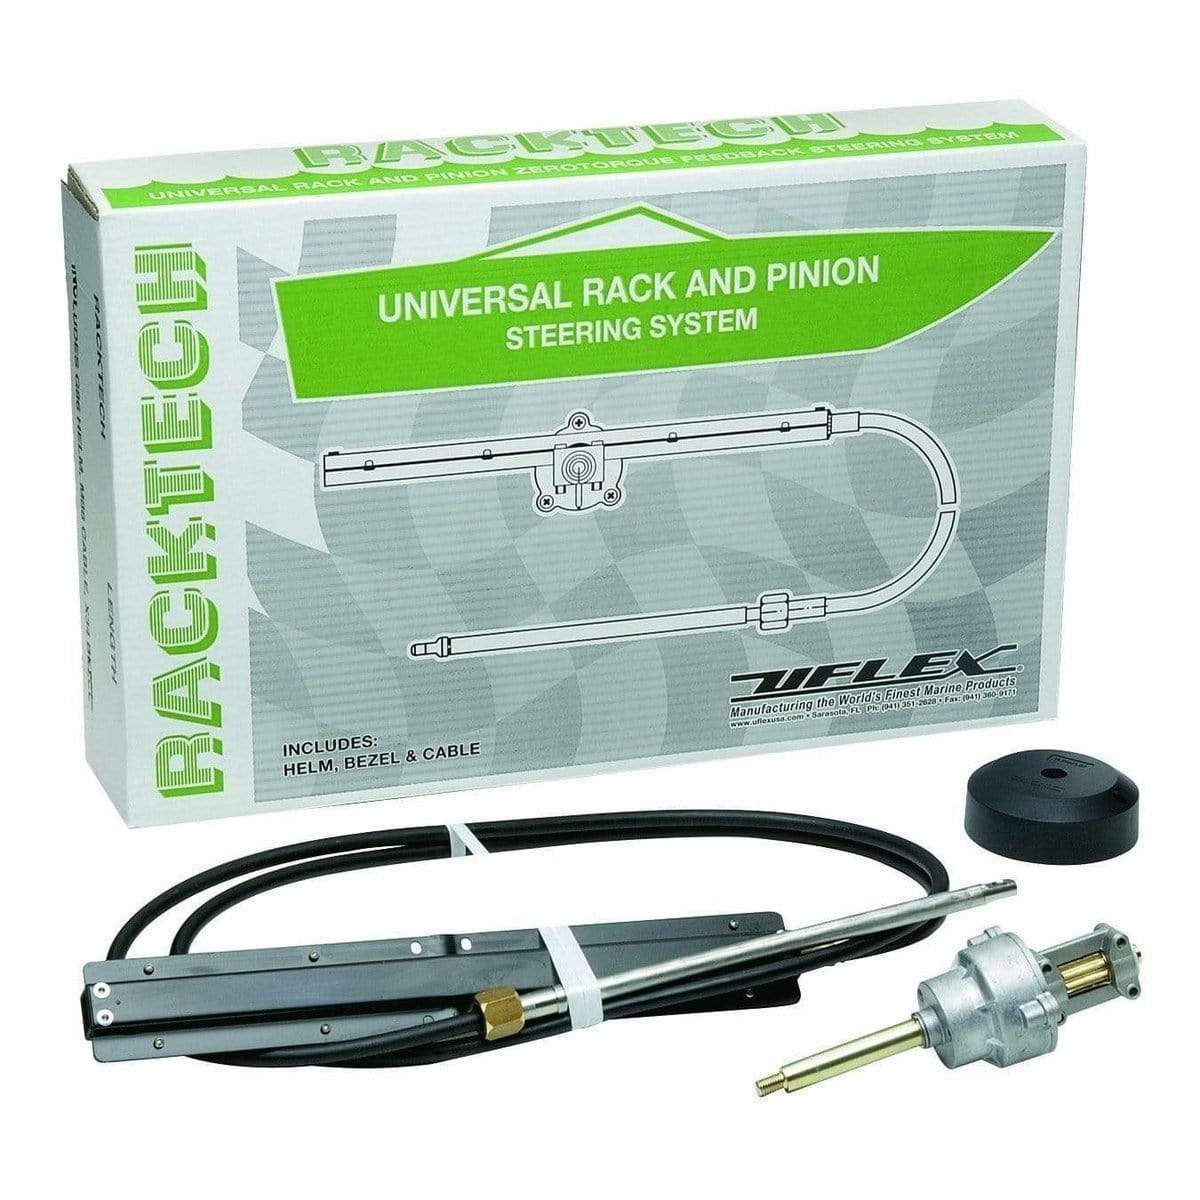 Uflex USA Qualifies for Free Shipping Uflex Rack and Pinion Steering Kit with 10 Ft. Cable #RACKTECH10